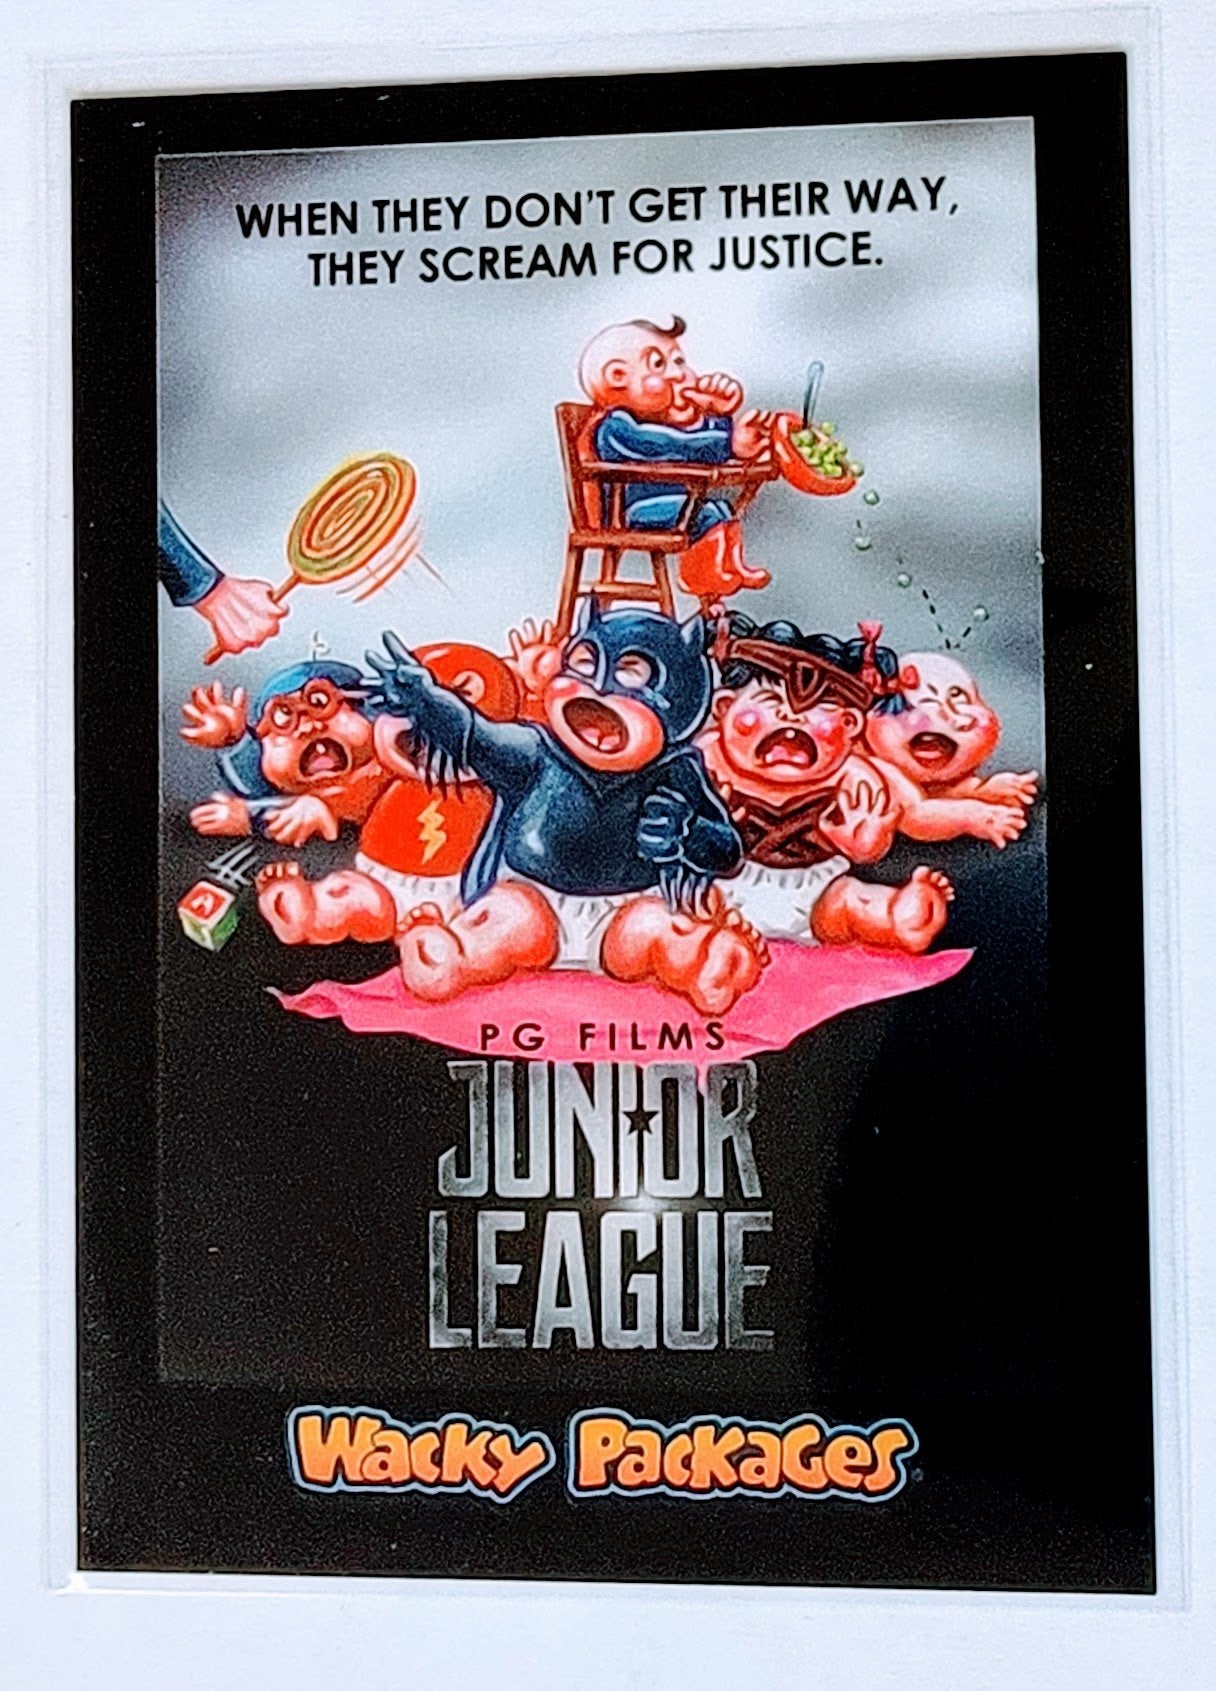 2018 Wacky Packages Go to the Movies Action Film Stickers Junior League PG Films #3 Sticker Trading Card MCSC1 simple Xclusive Collectibles   